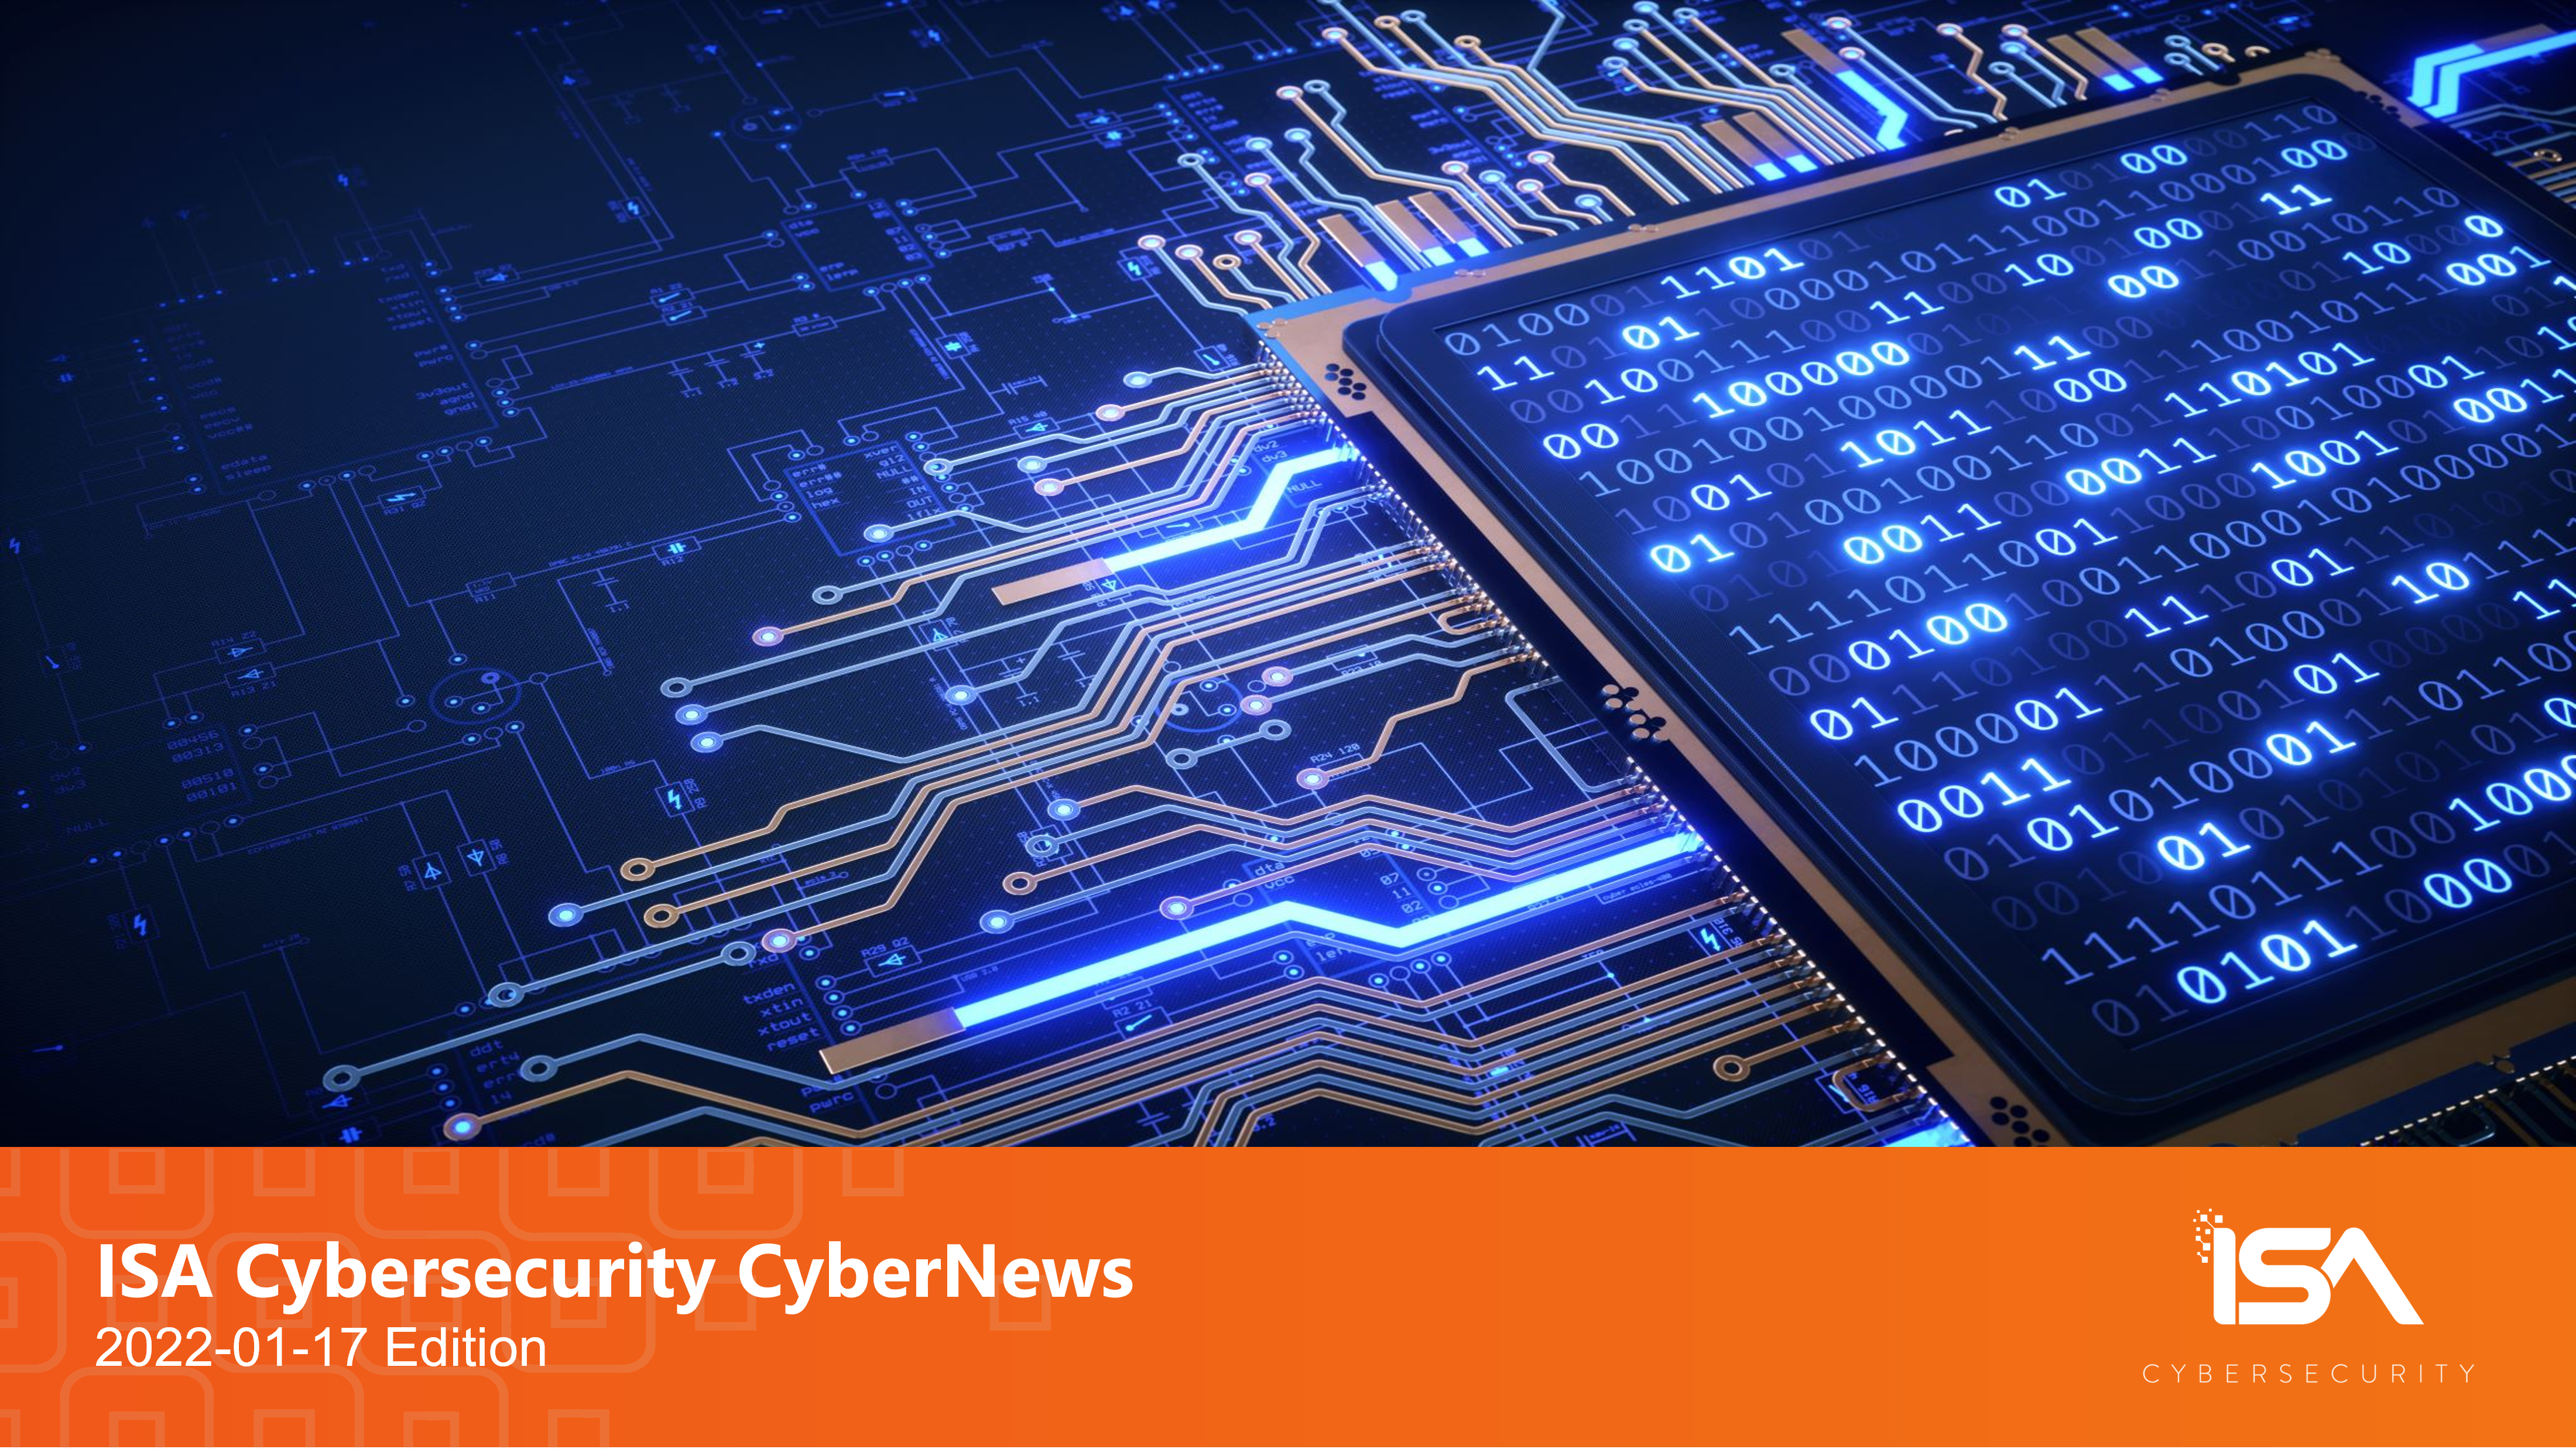 Cyber News Banner 2022-01-17 Edition